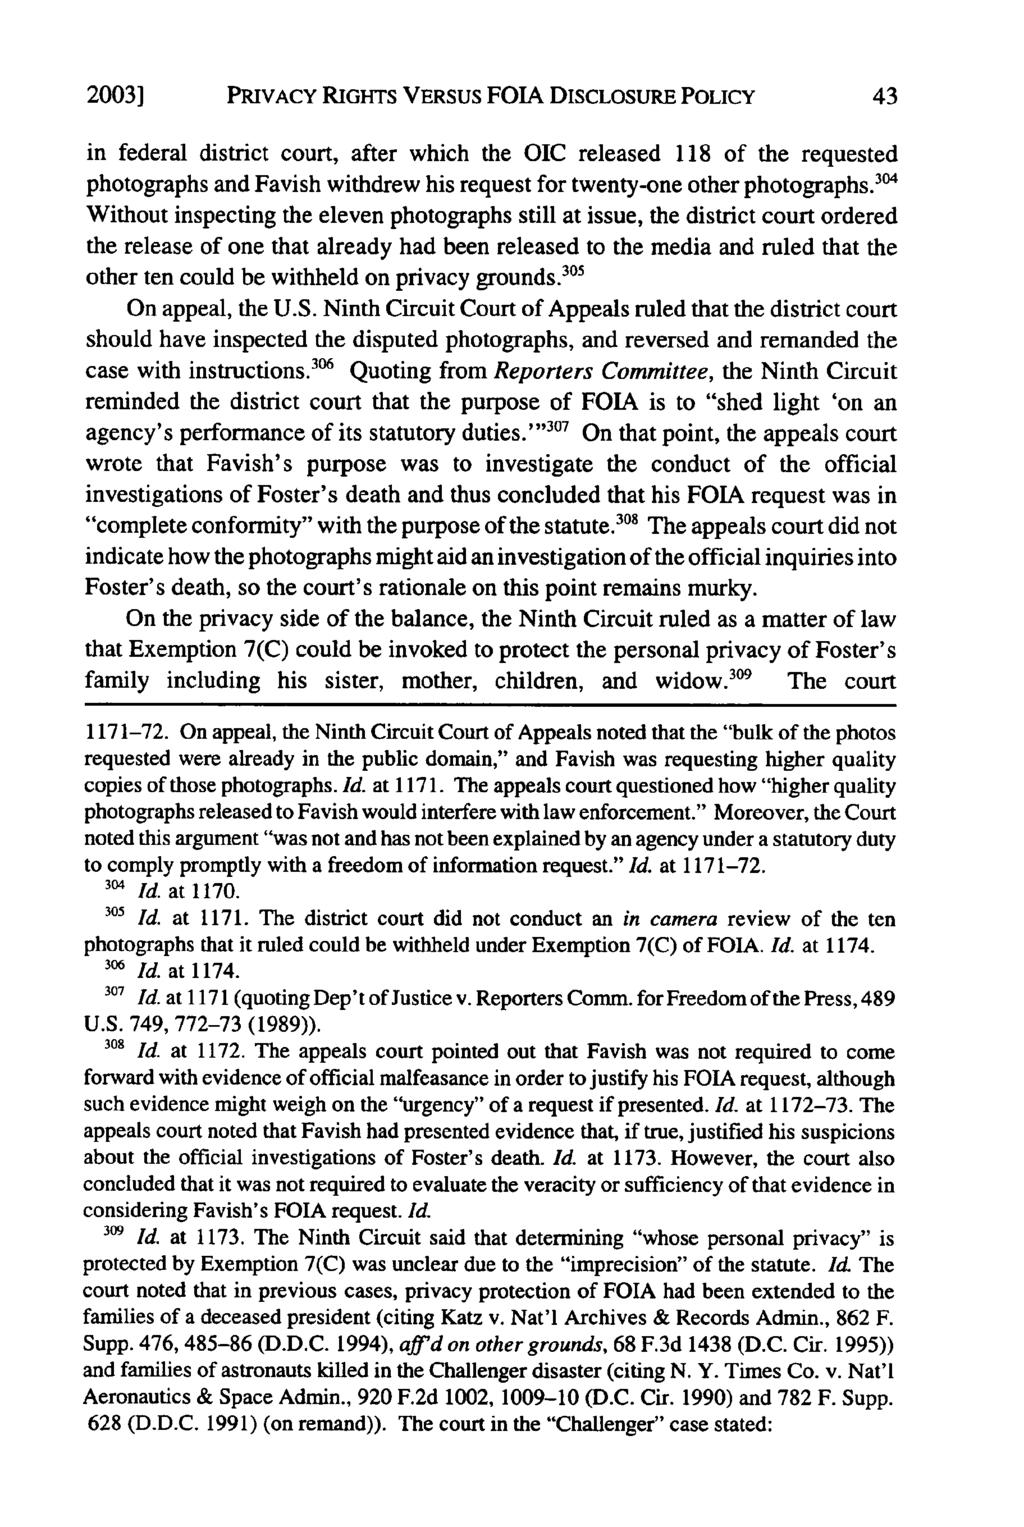 2003] PRIVACY RIGHTS VERSUS FOIA DISCLOSURE POLICY in federal district court, after which the OIC released 118 of the requested photographs and Favish withdrew his request for twenty-one other